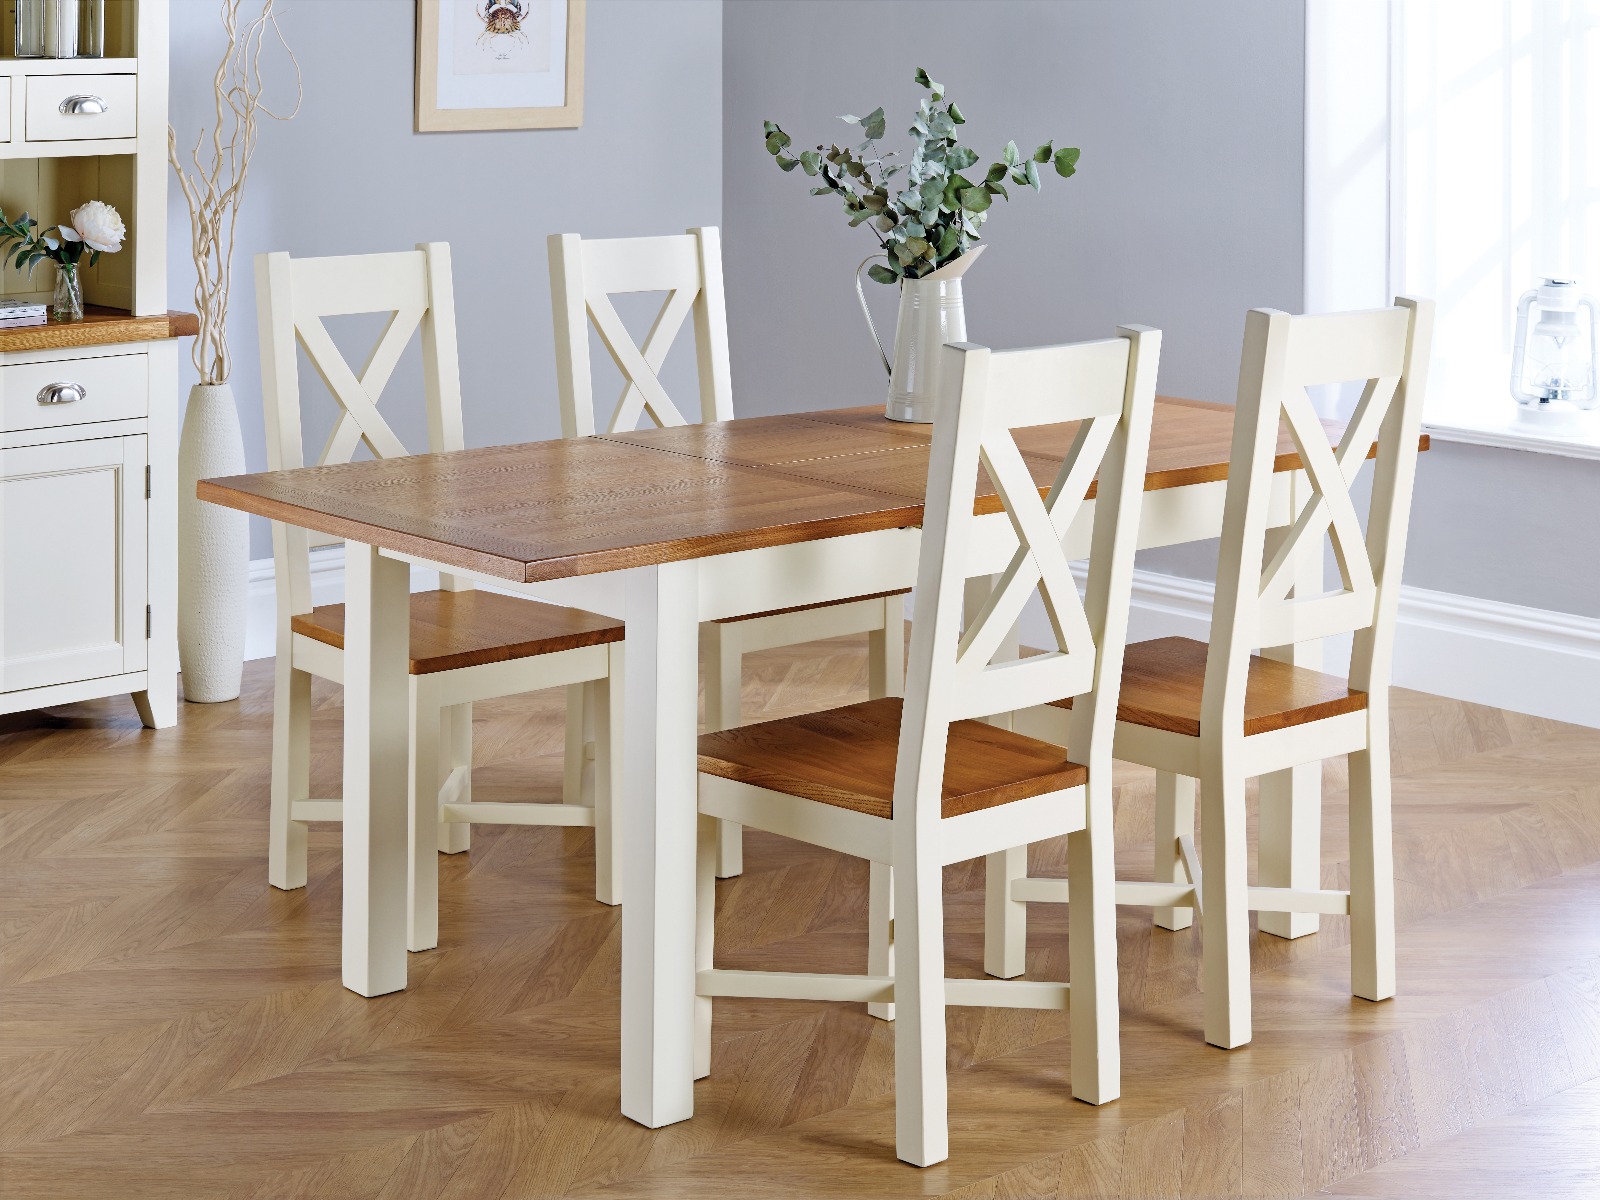 Country Oak 180cm Cream Painted Extending Dining Table 4 Grasmere Cream Painted Chairs